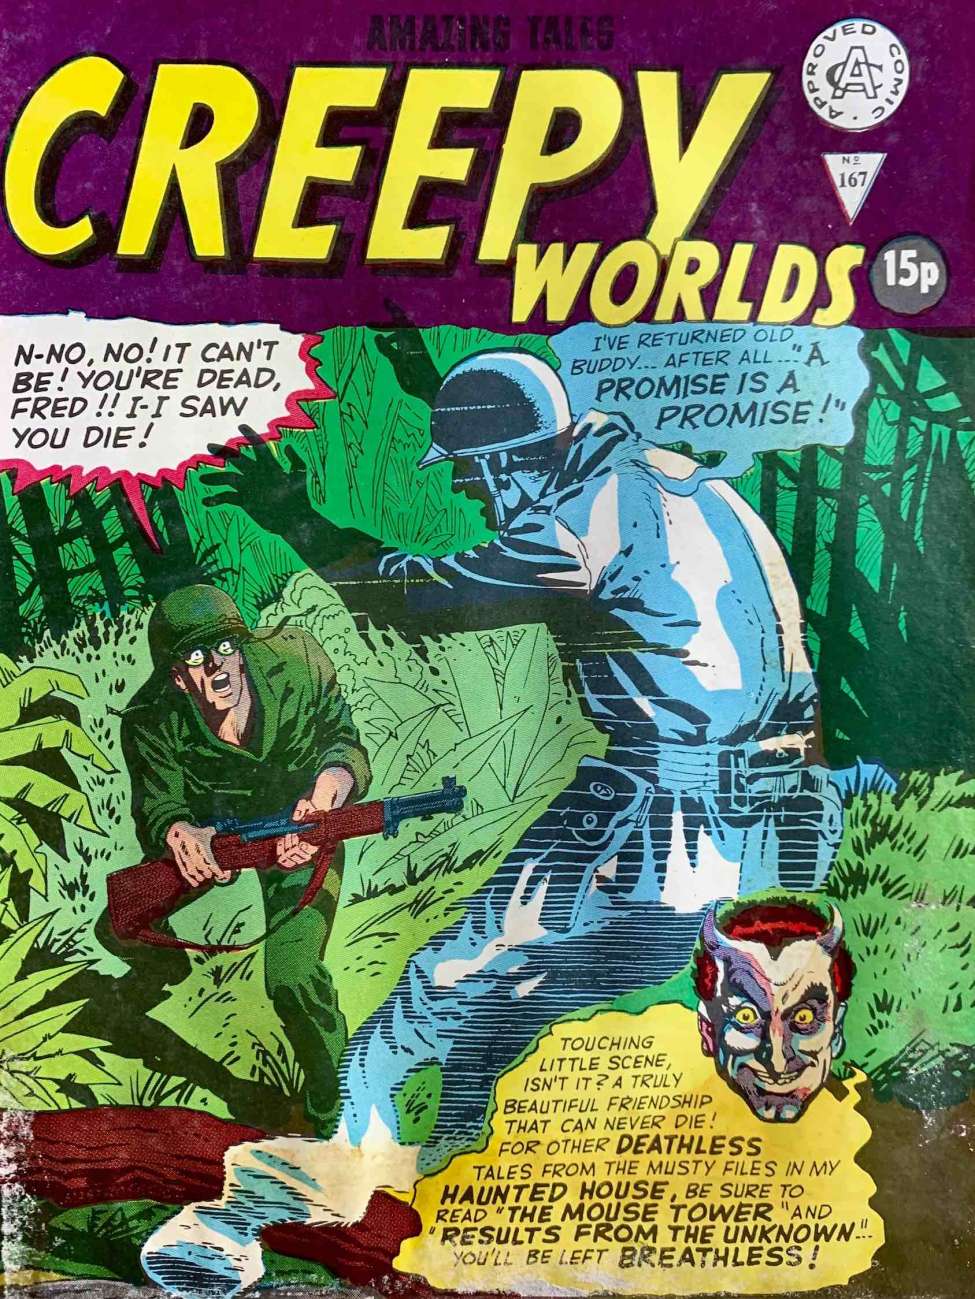 Book Cover For Creepy Worlds 167